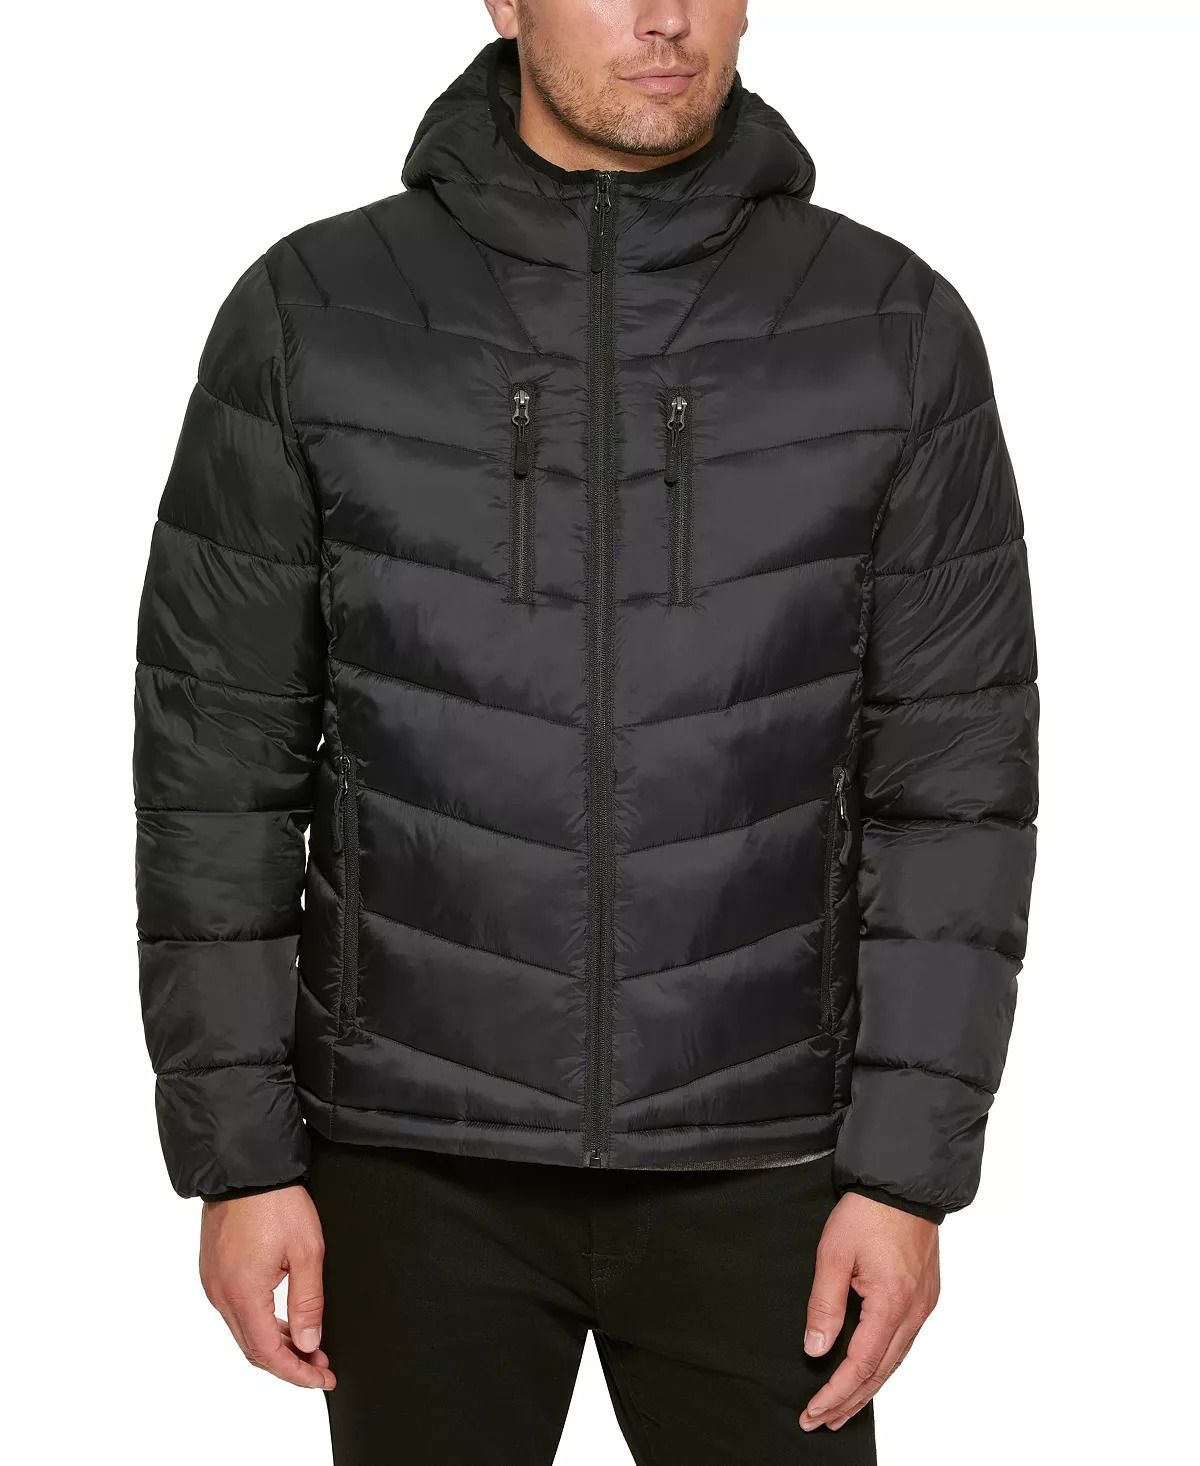 ** Today Only** Club Room Puffer Jackets: Men's Chevron Quilted Hooded Puffer Jacket or Down Packable Puffer Jacket (Various) $25 & More + Free Shipping